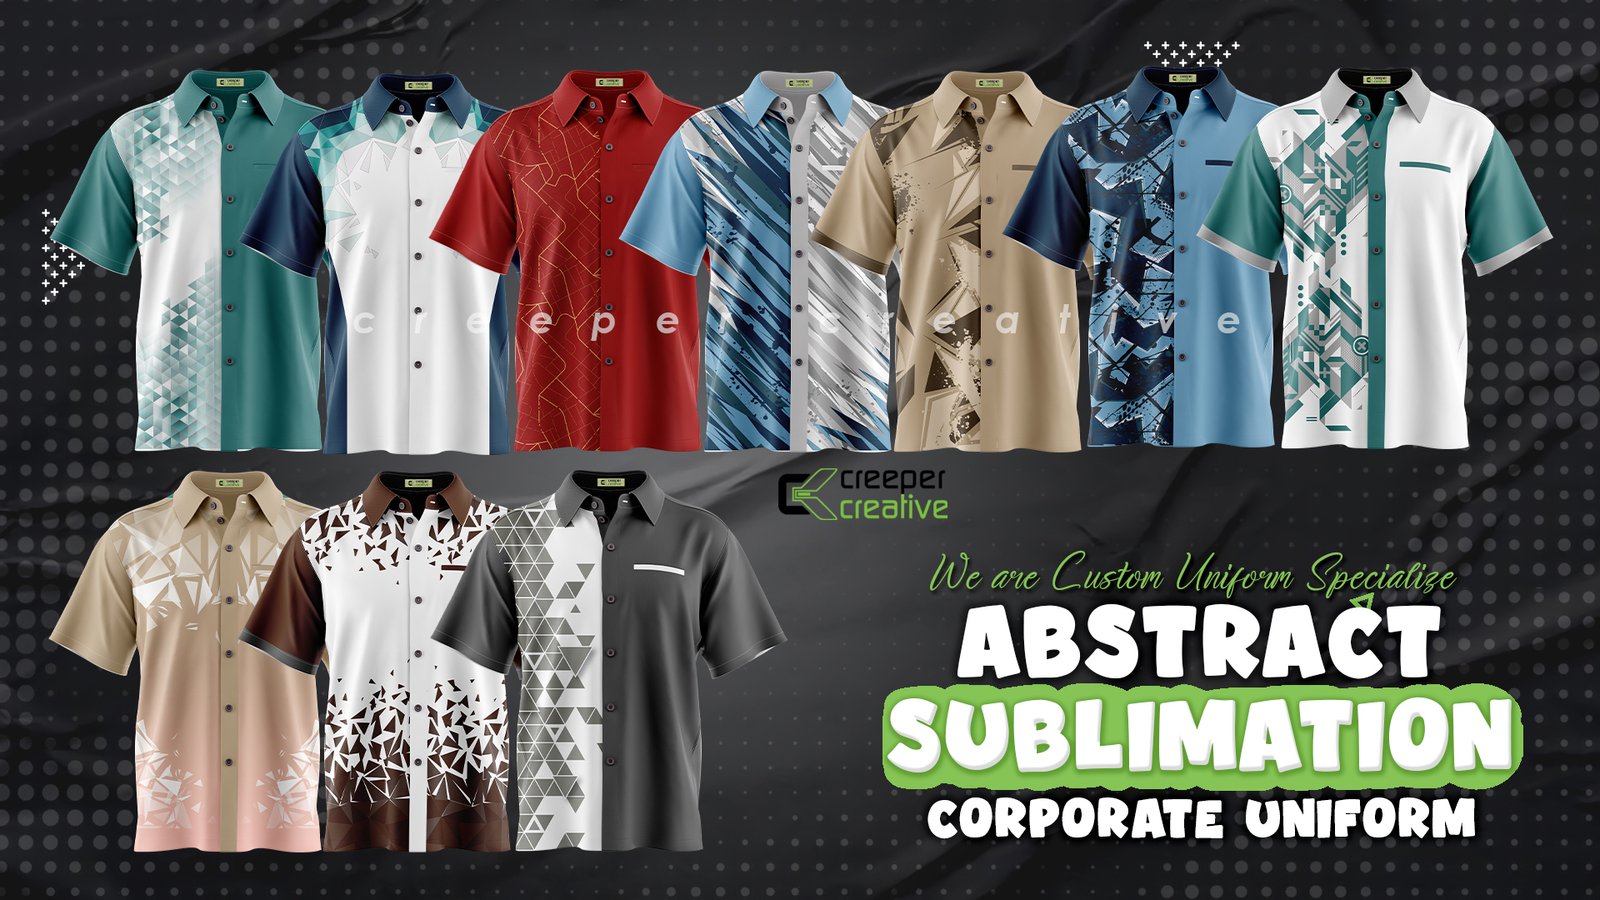 2. ABSTRACT SUBLIMATION